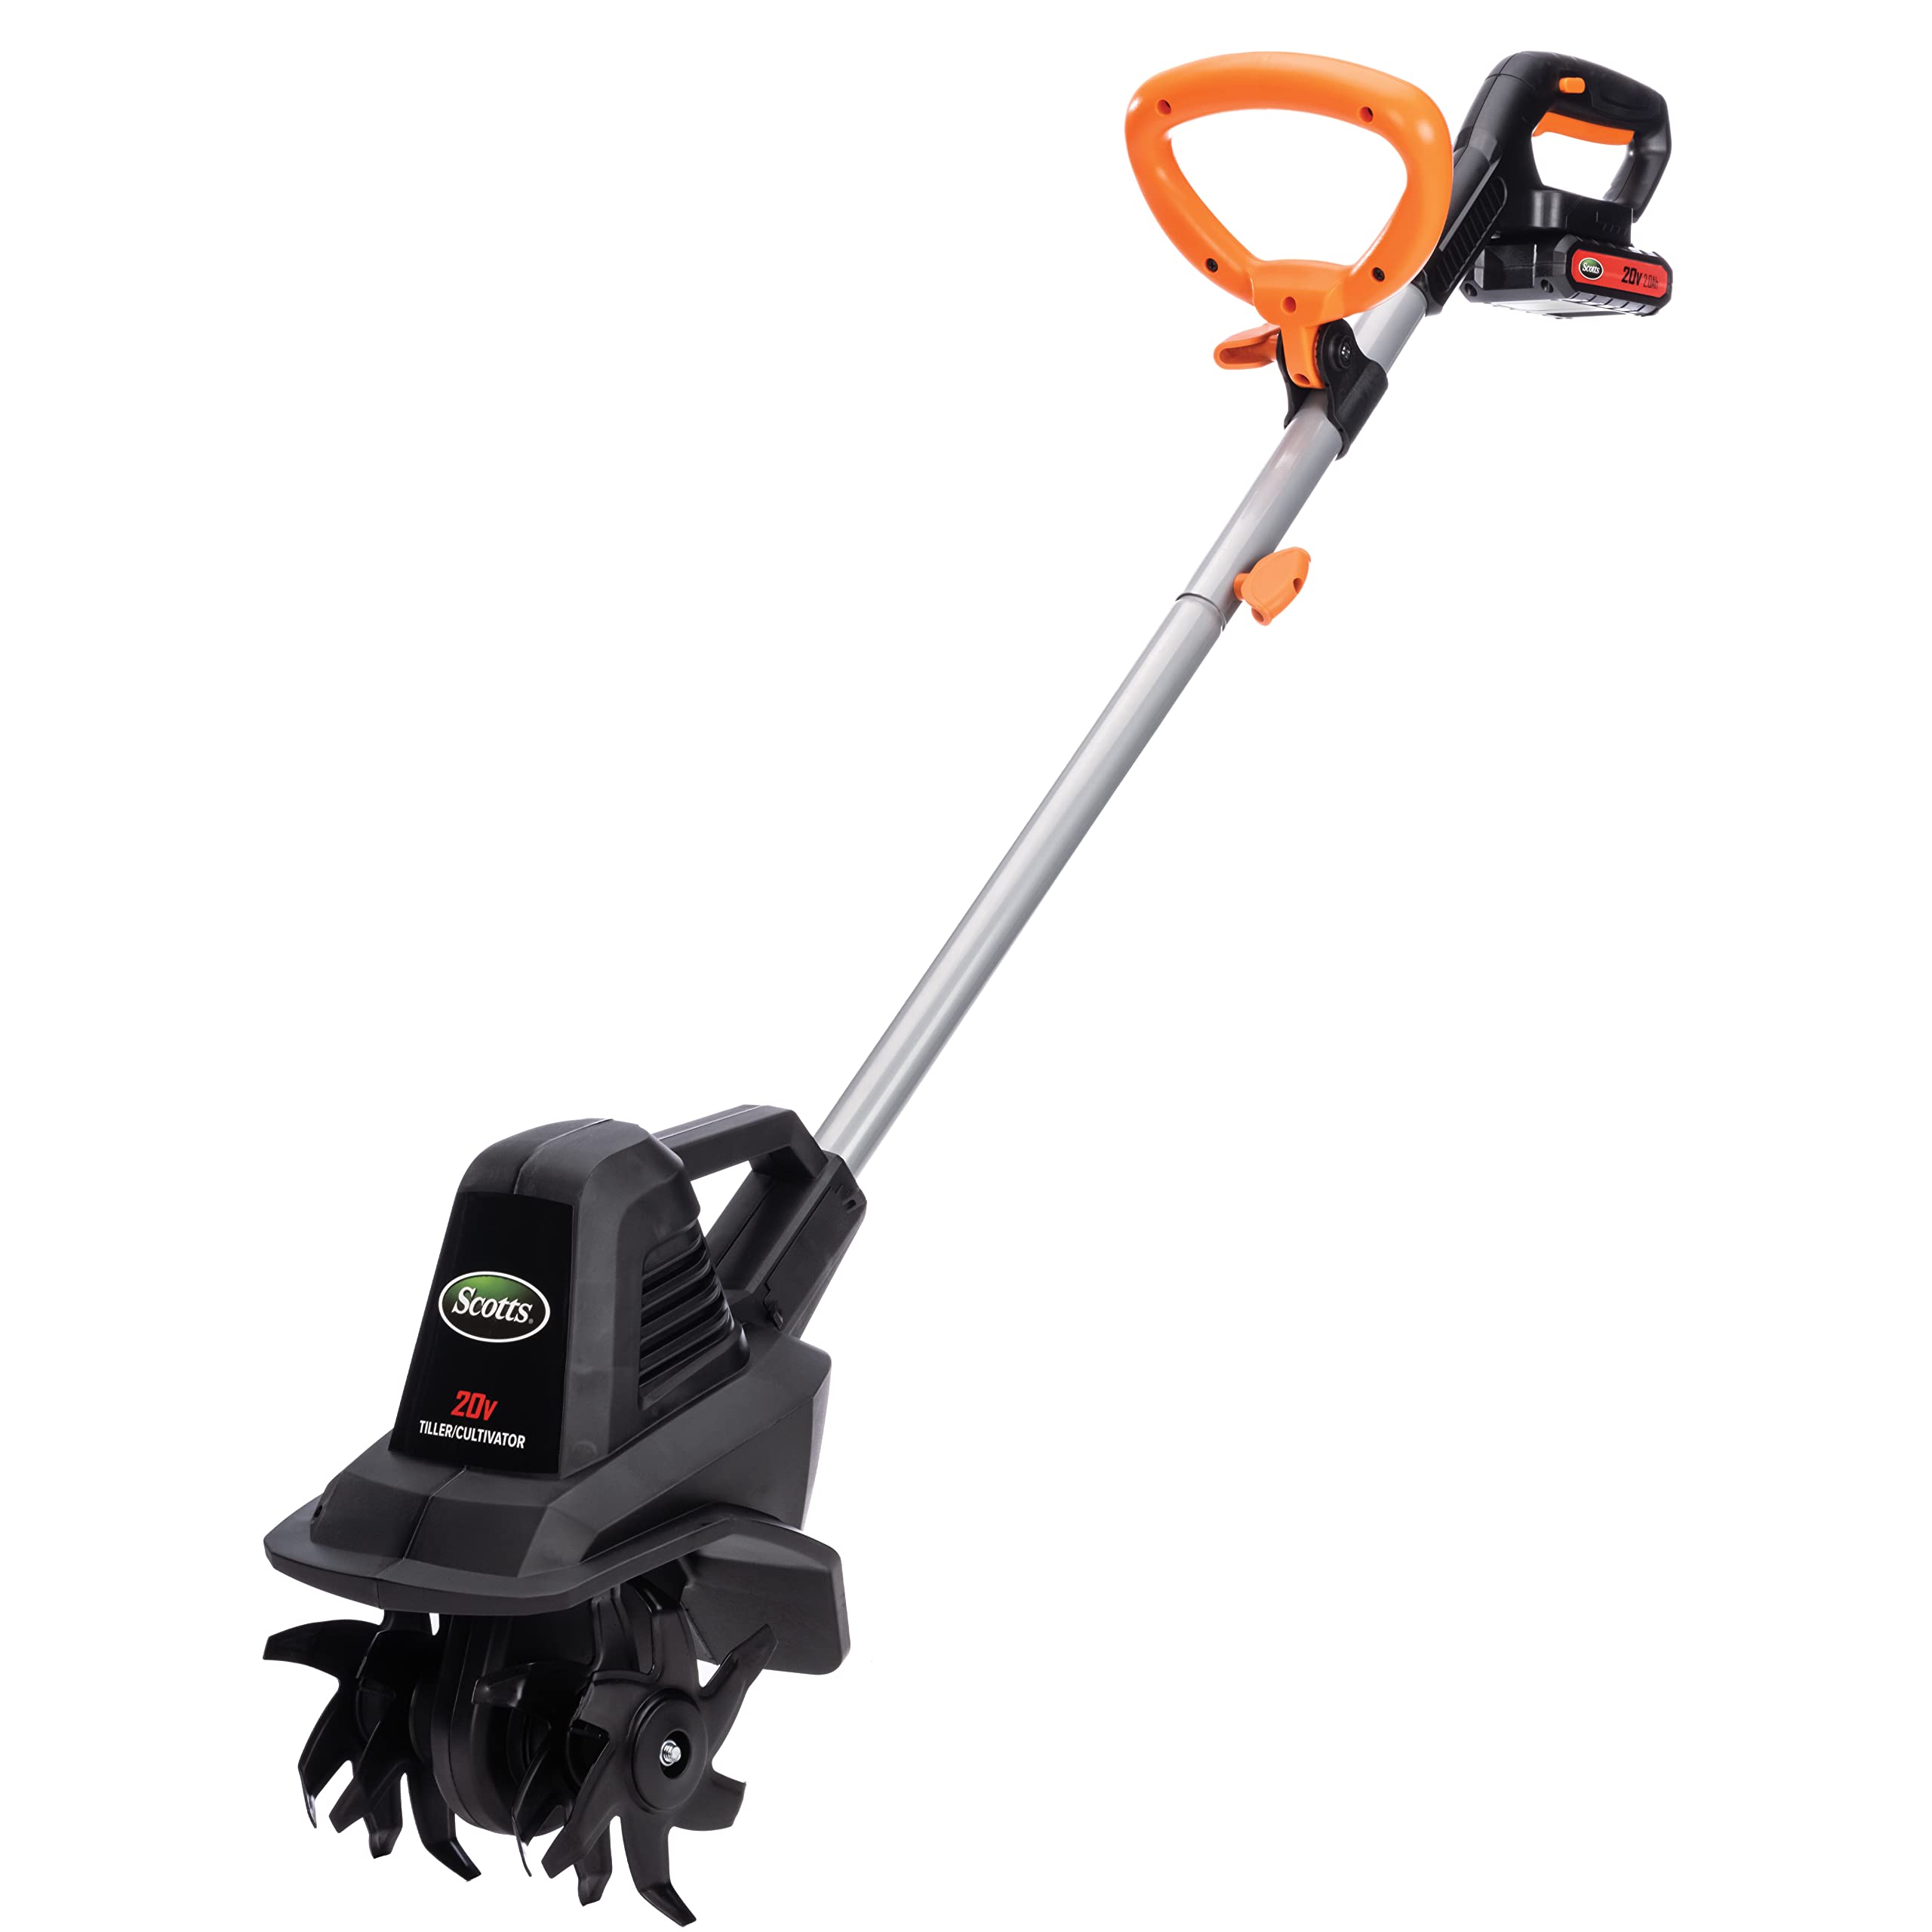 Scotts Outdoor Power Tools TC70020S 20-Volt 7.5-Inch Cordless Garden Tiller Cultivator 2AH Battery Fast Charger Included